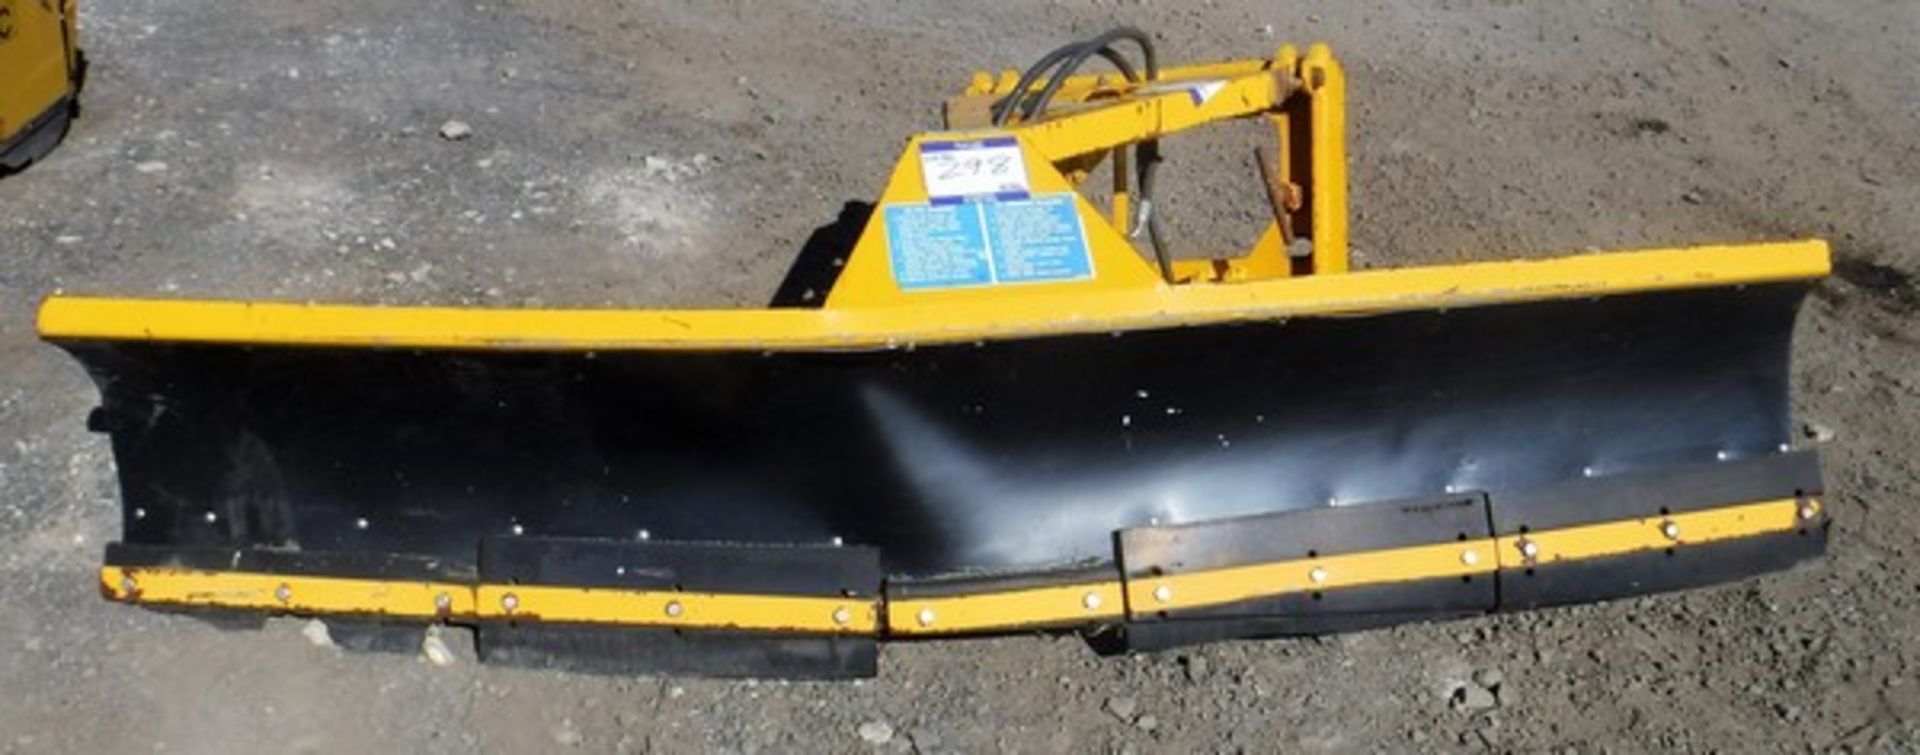 ECON WSR0RR23 snow plough with 9ft blade s/n 37498